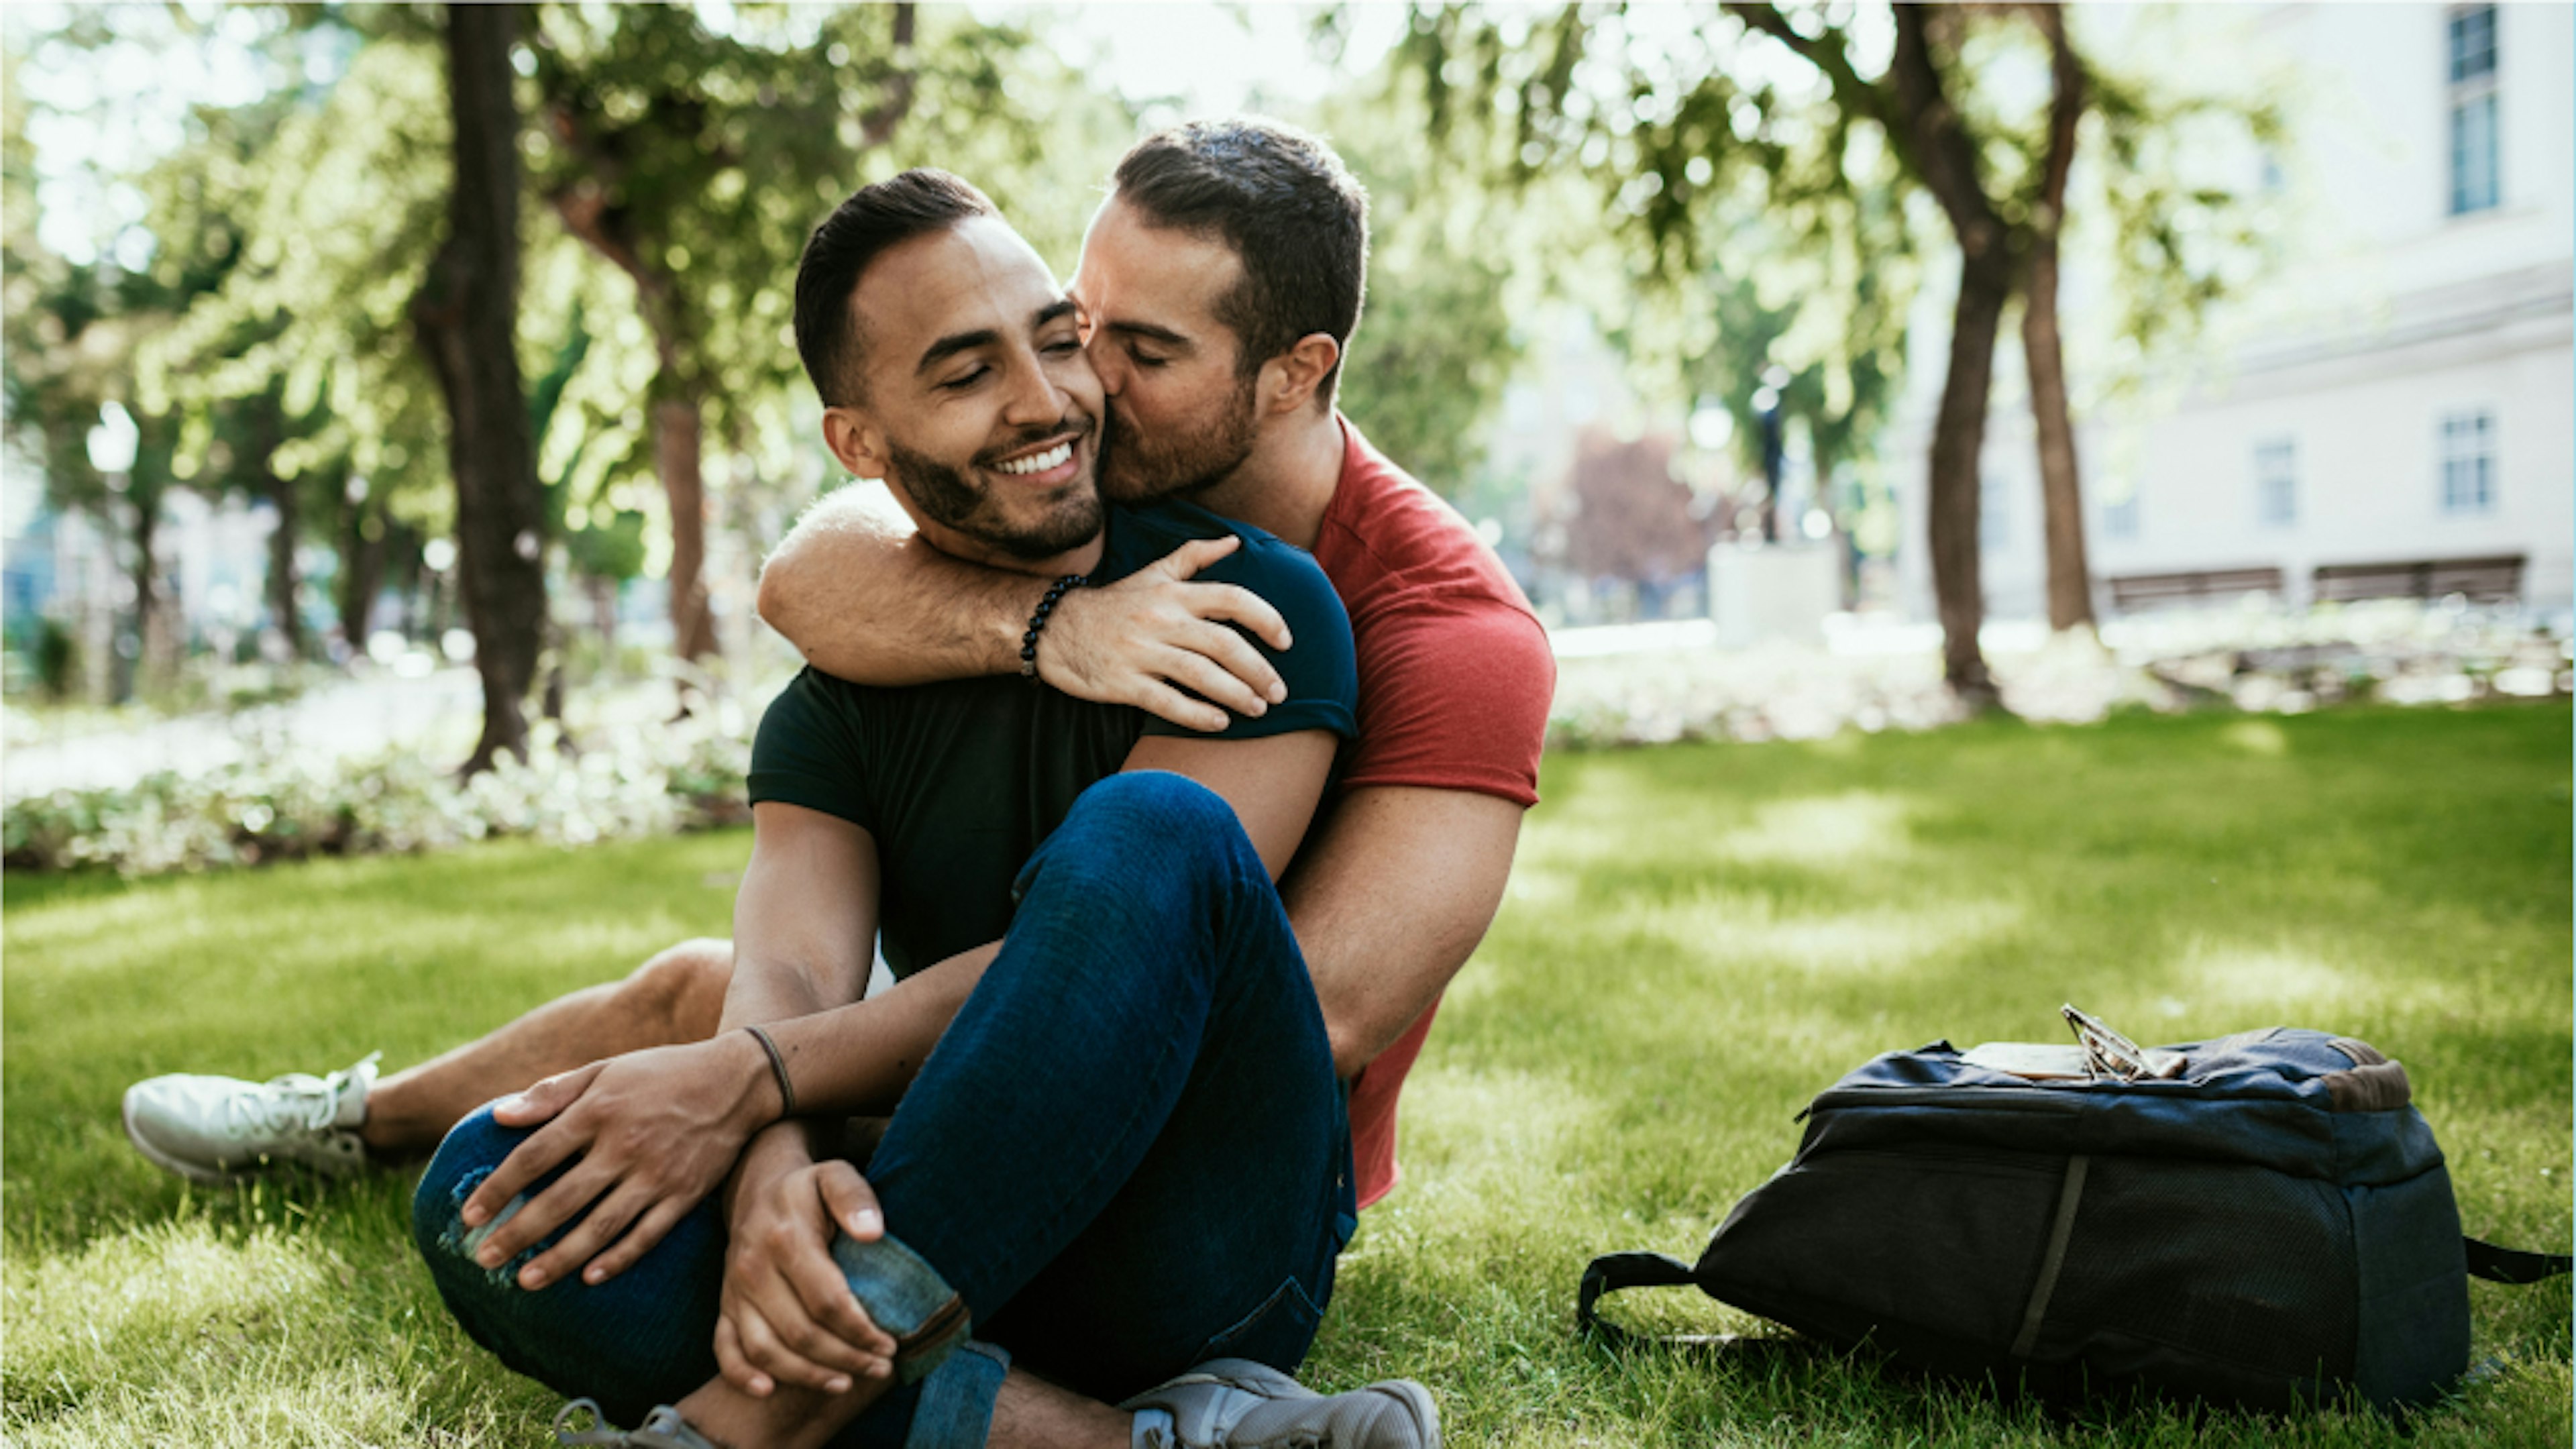 Couple embracing each other while sitting on grass.